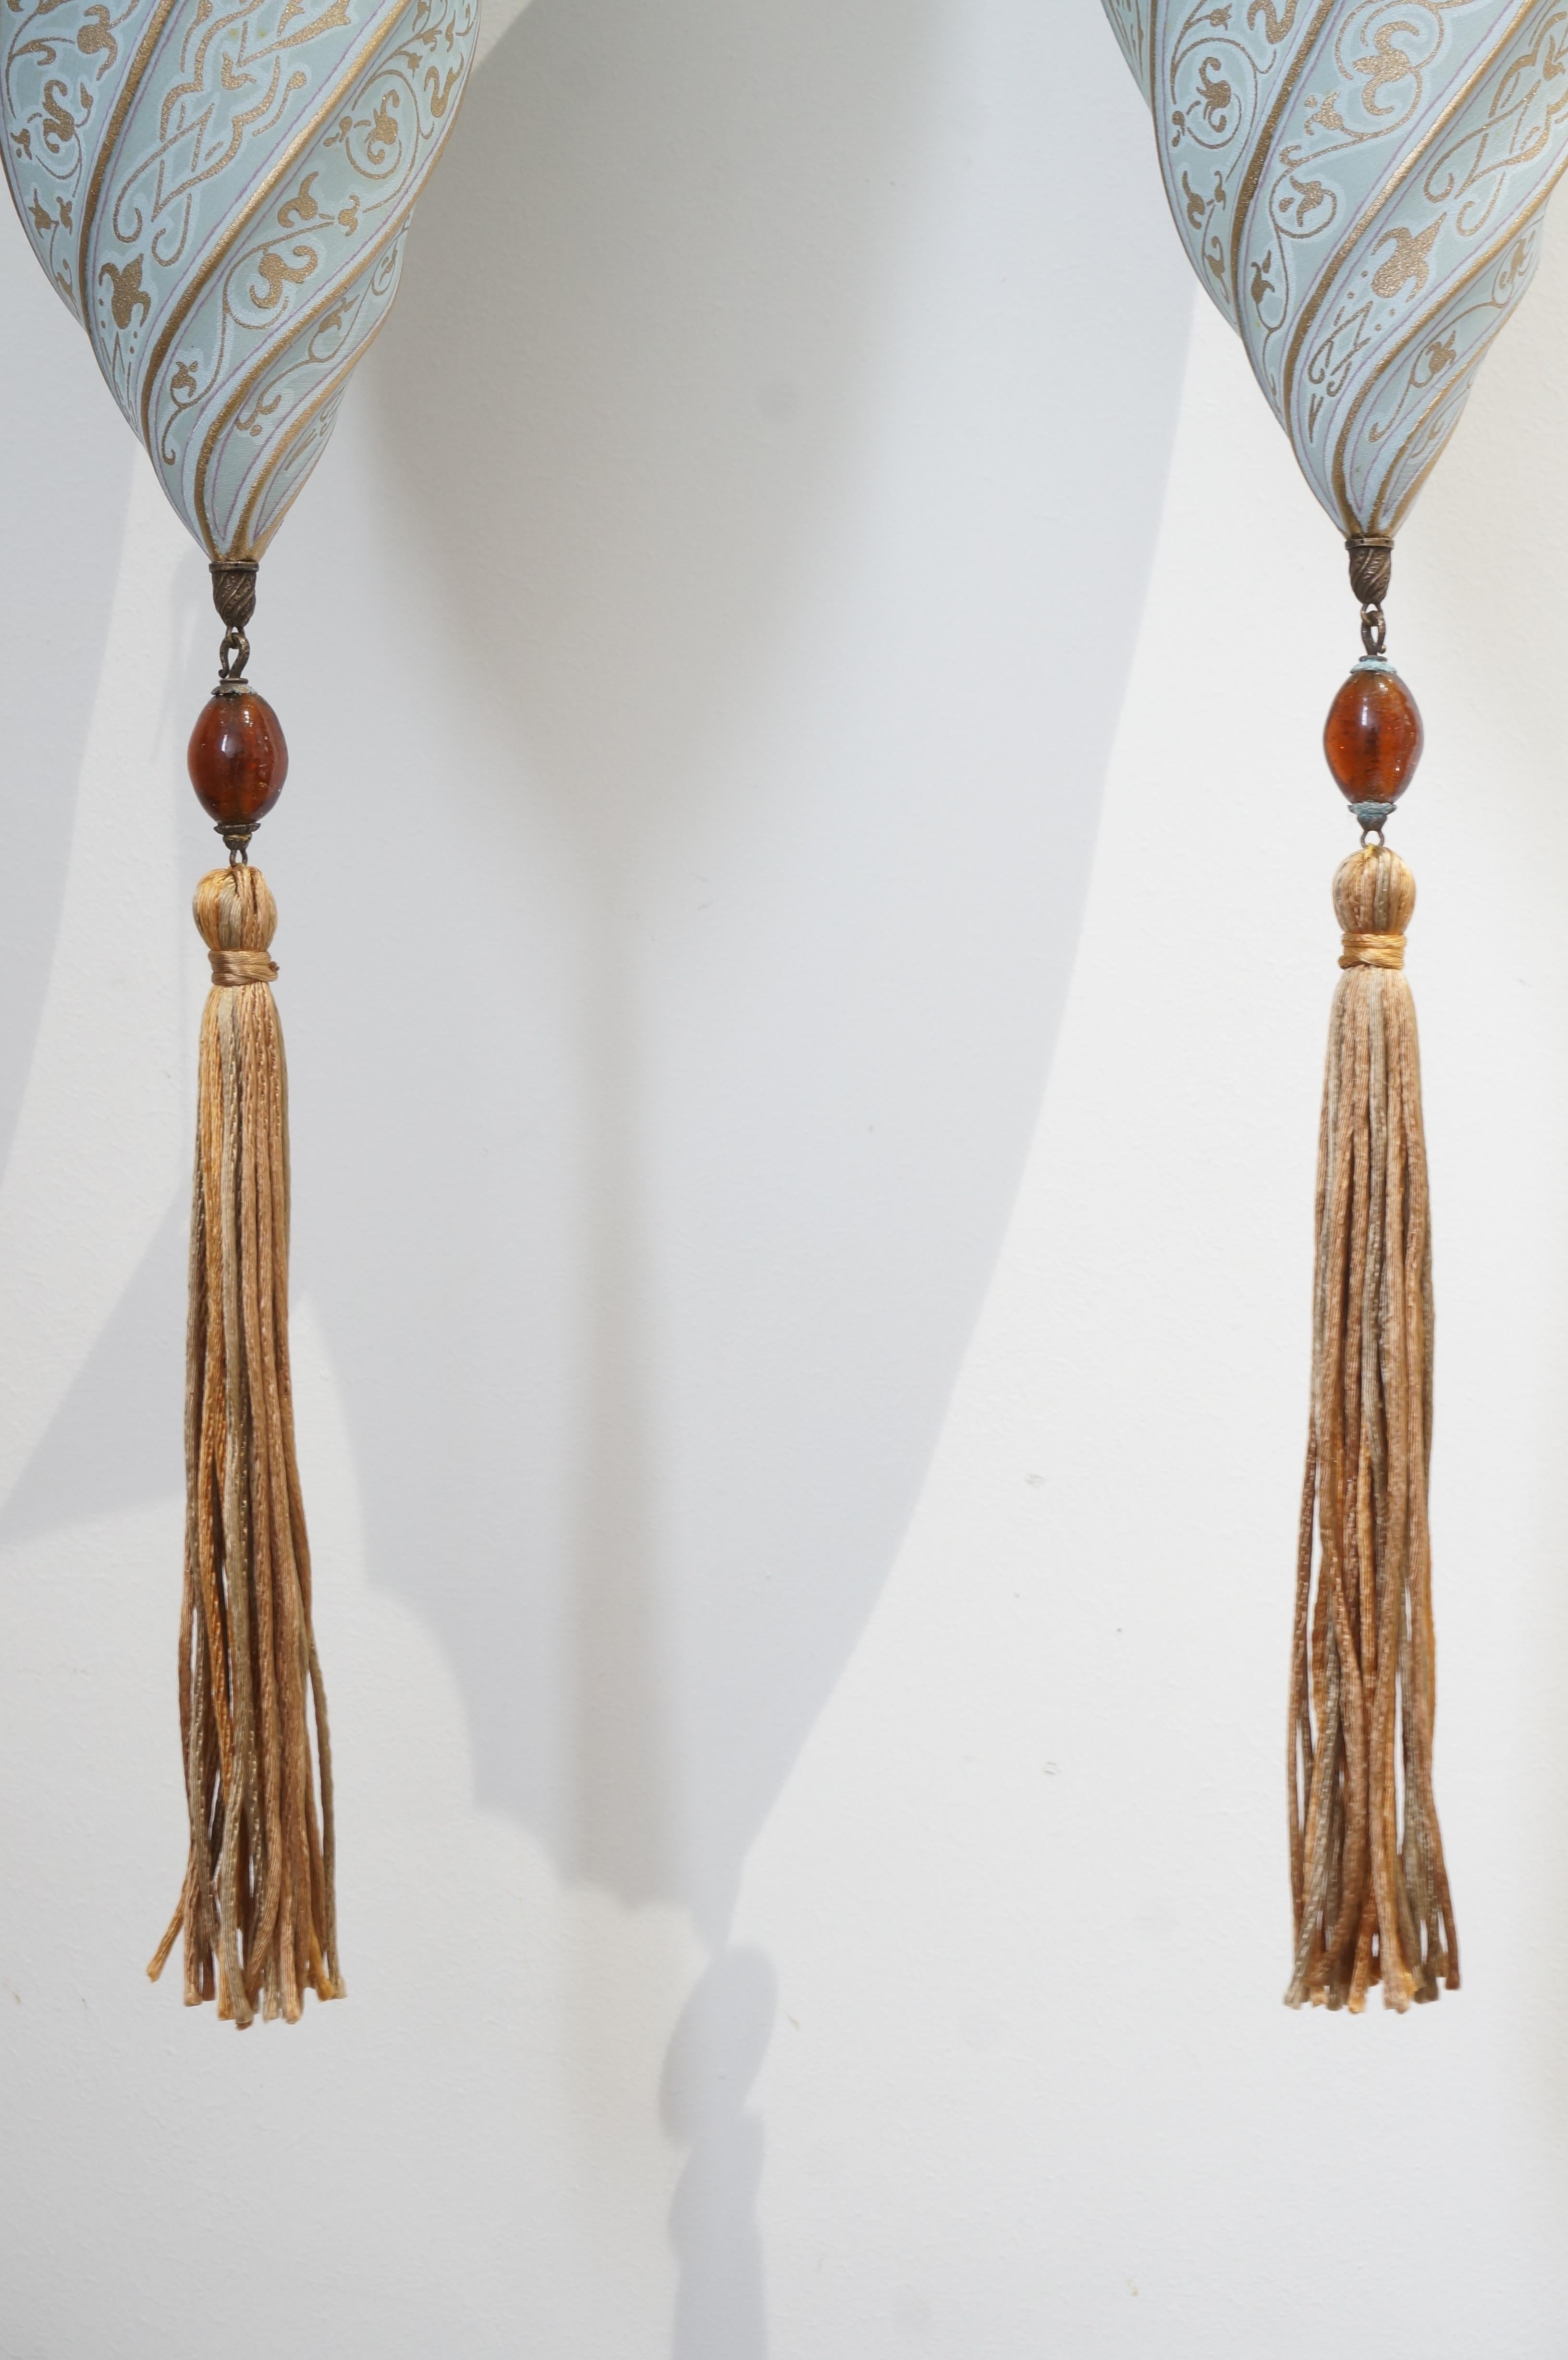 20th Century Pair of Fortuny Cesendello Silk Sconces